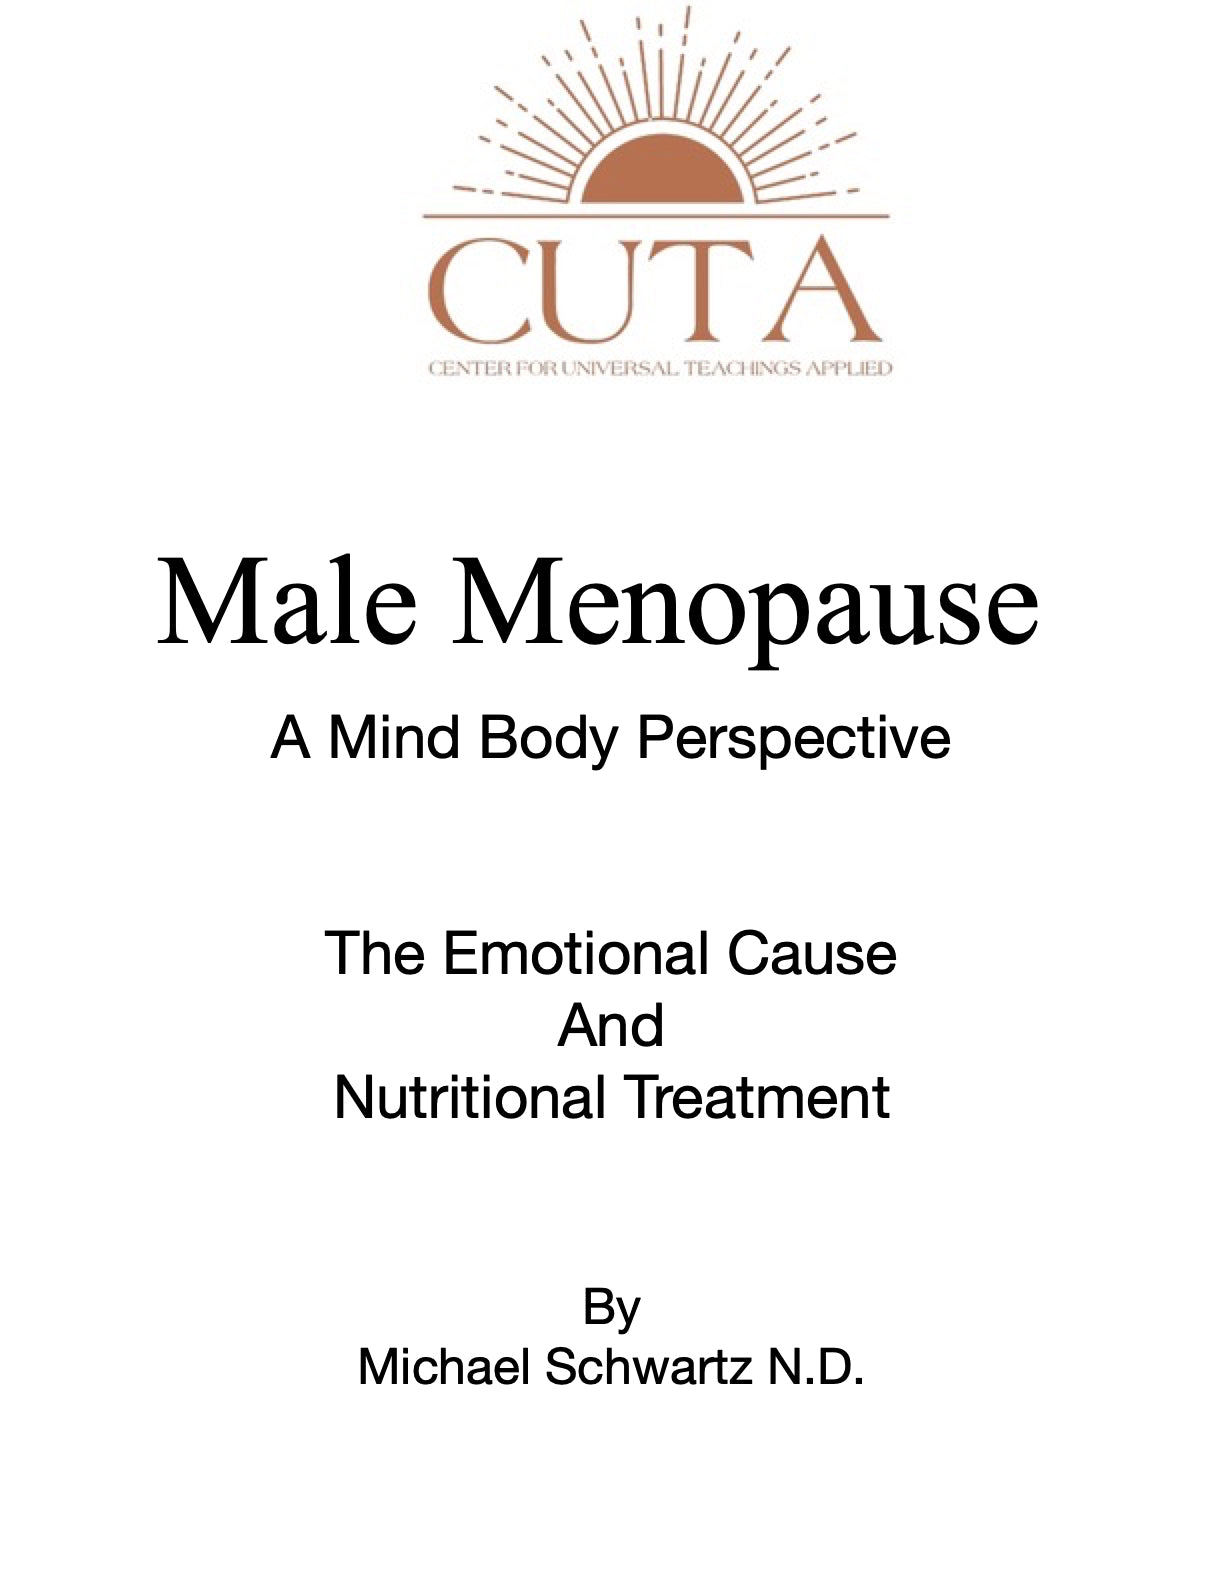 Male Menopause Booklet